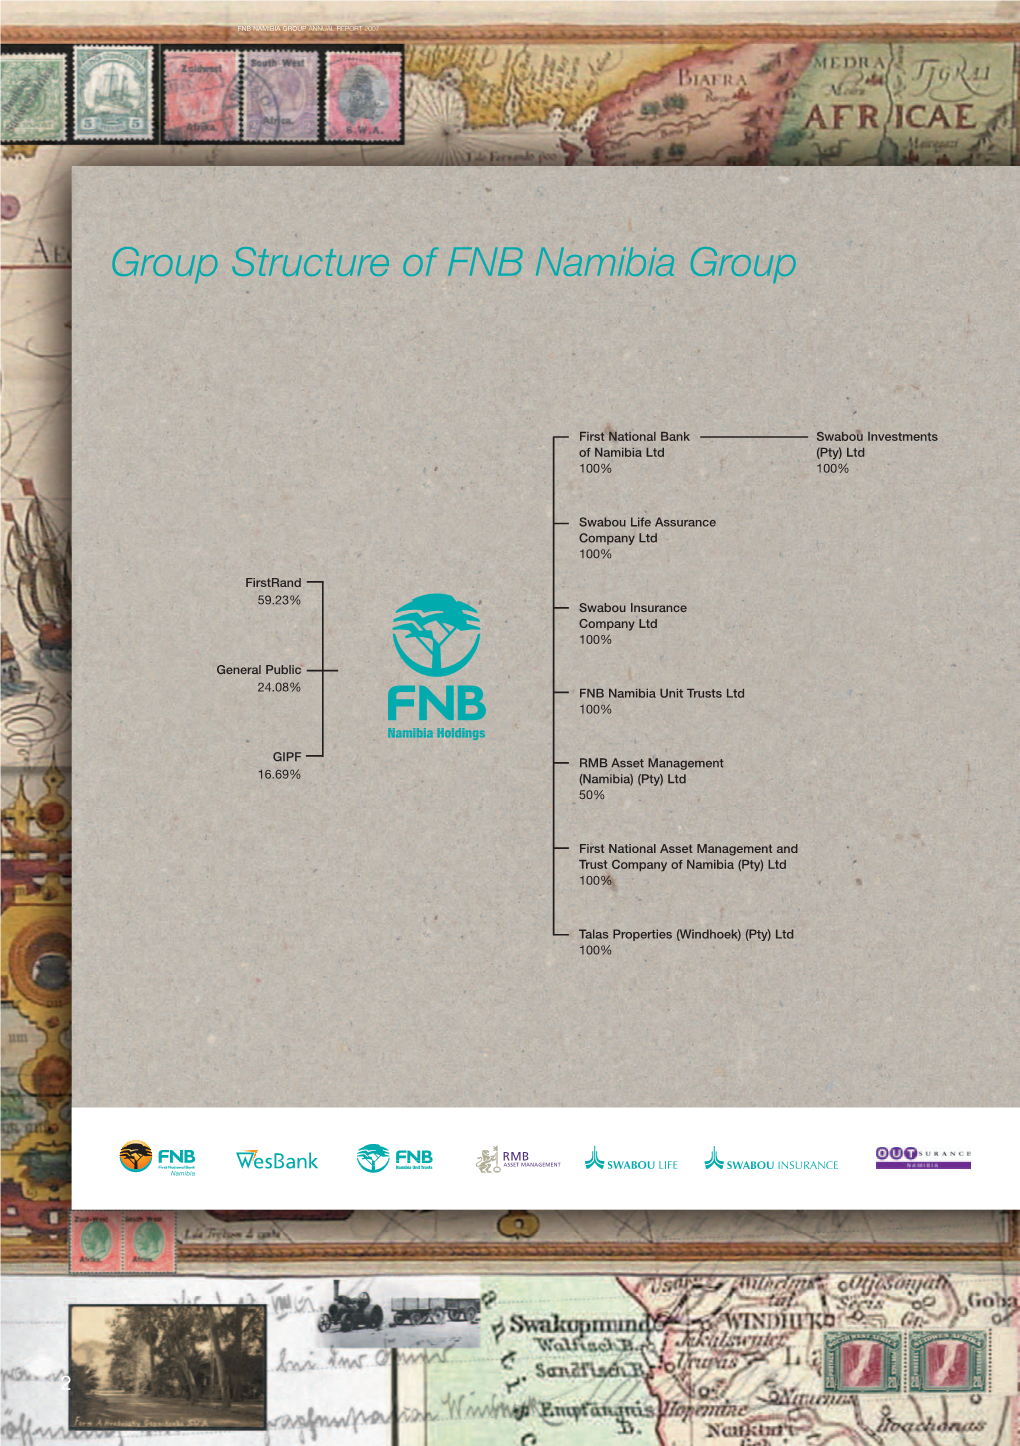 Group Structure of FNB Namibia Group